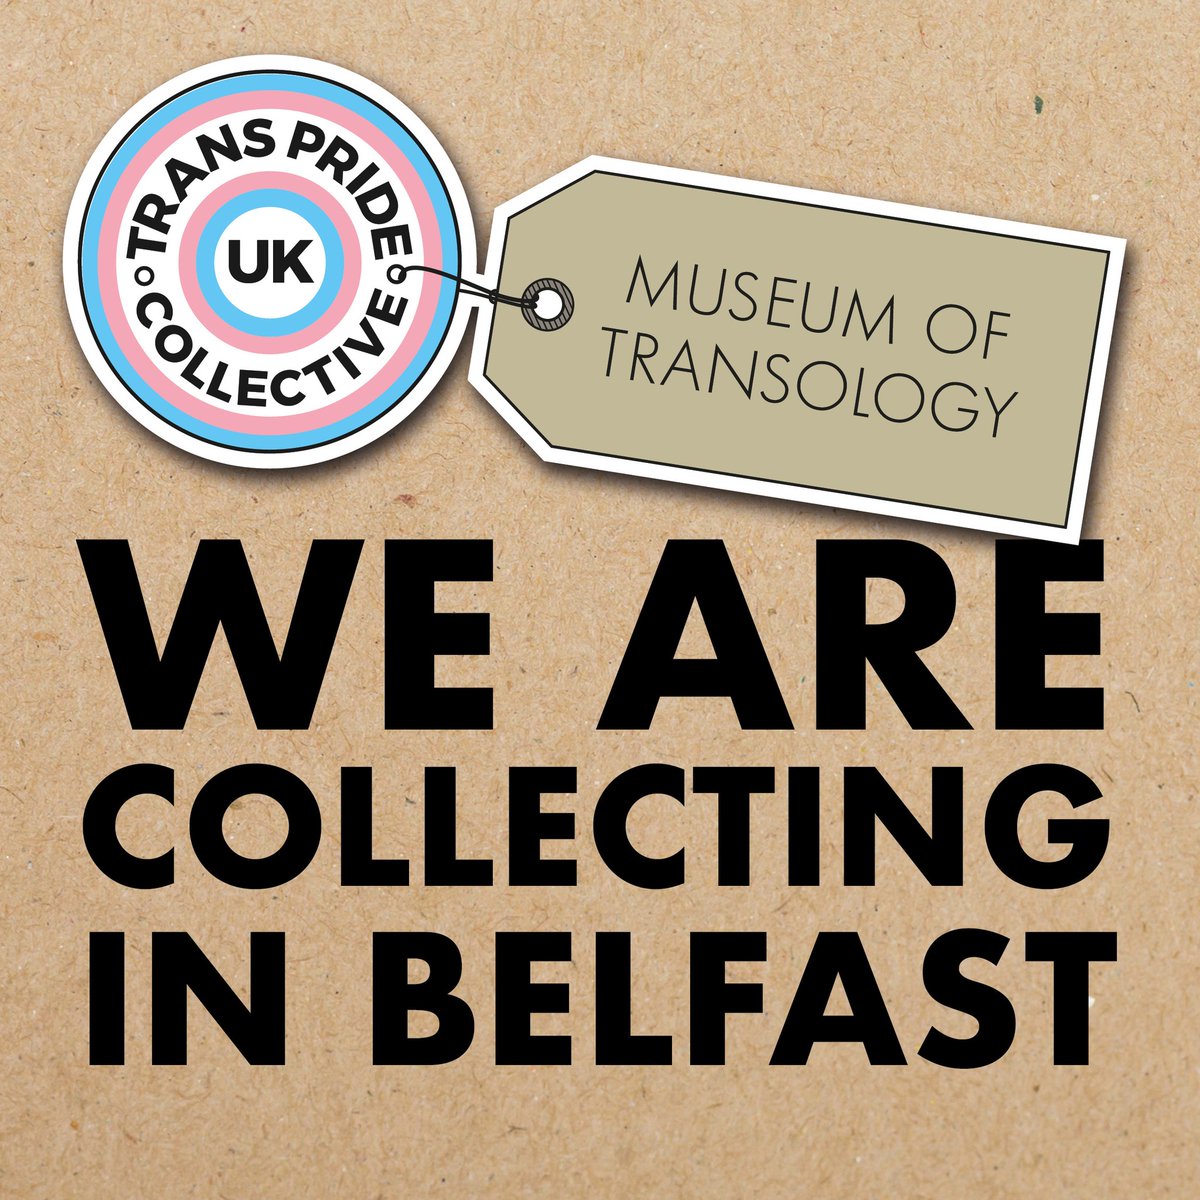 Saving Trans Stories Saves Trans Lives 🏳️‍⚧️ @transprideni is helping @paperxclips collect objects that represent YOUR life as a trans, non-binary or intersex person for the Museum of Transology. 🗓️Saturday, 20 April 2024 ⏰12.00-3.00pm #trans #nonbinary #enby #queer #lgbtqia